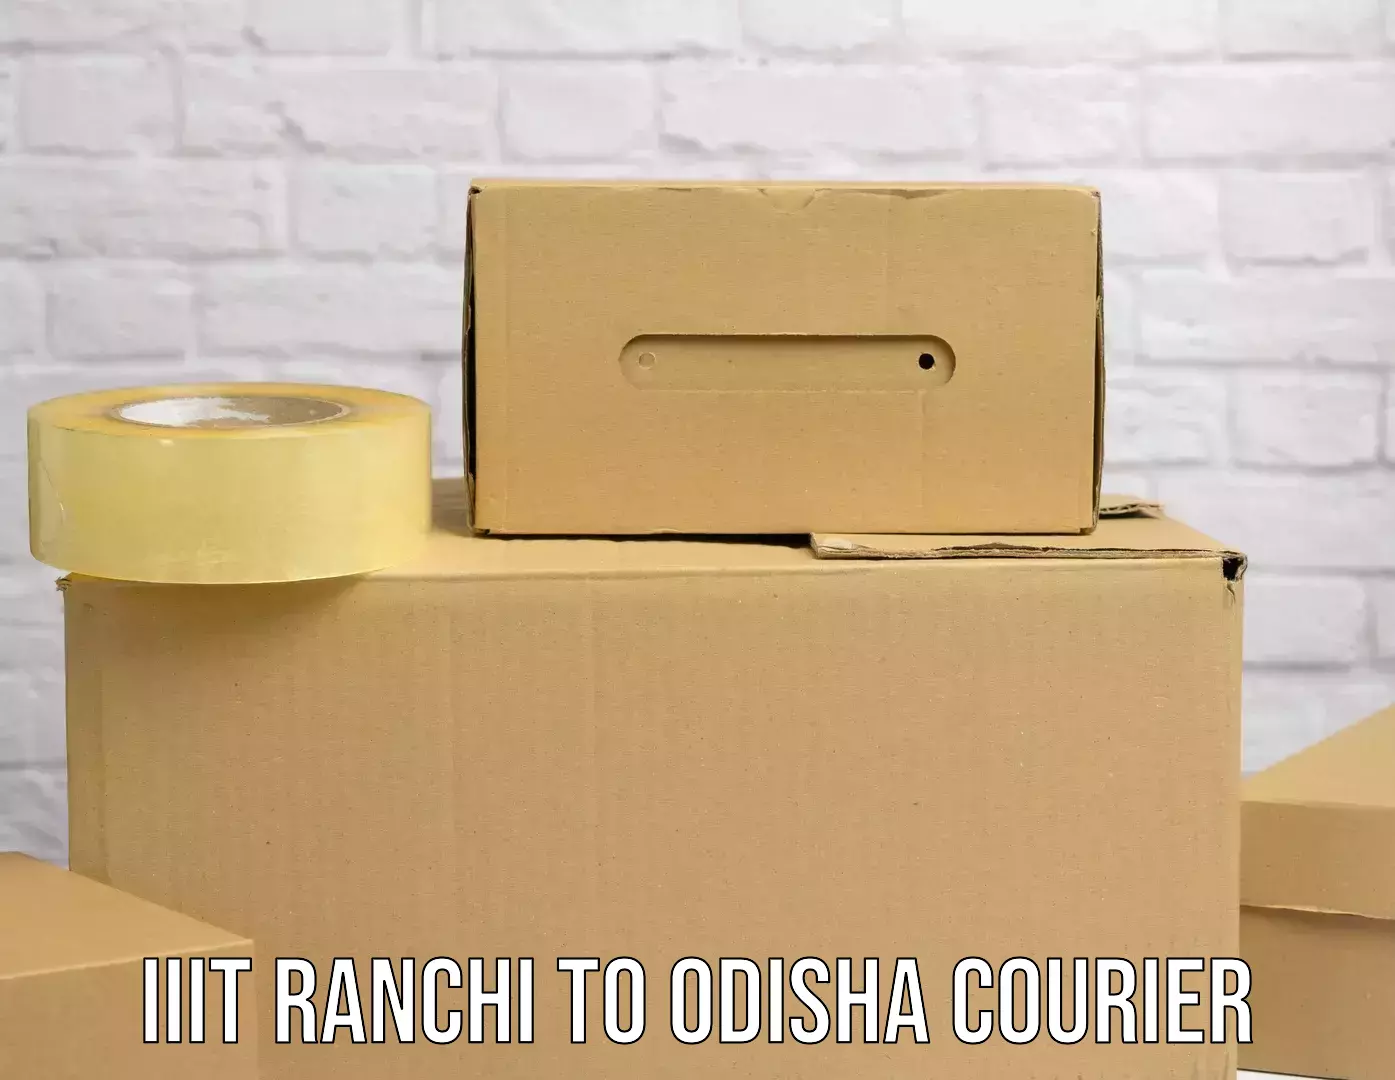 Courier service partnerships IIIT Ranchi to Sonepur